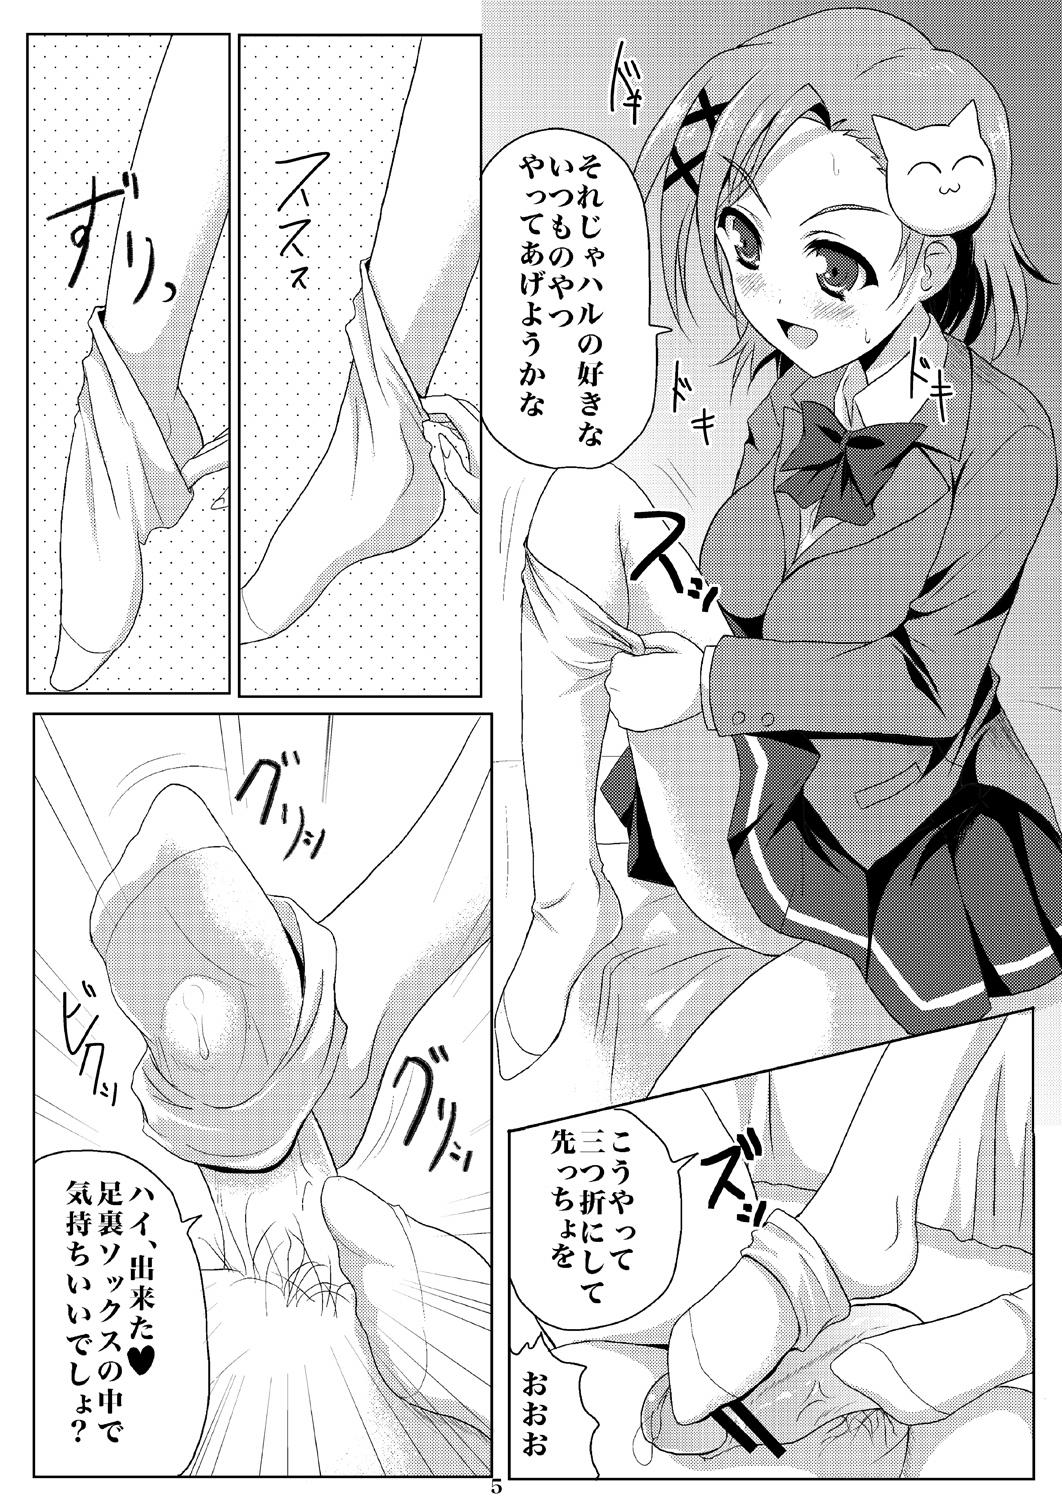 Russian New World - Accel world Orgame - Page 3